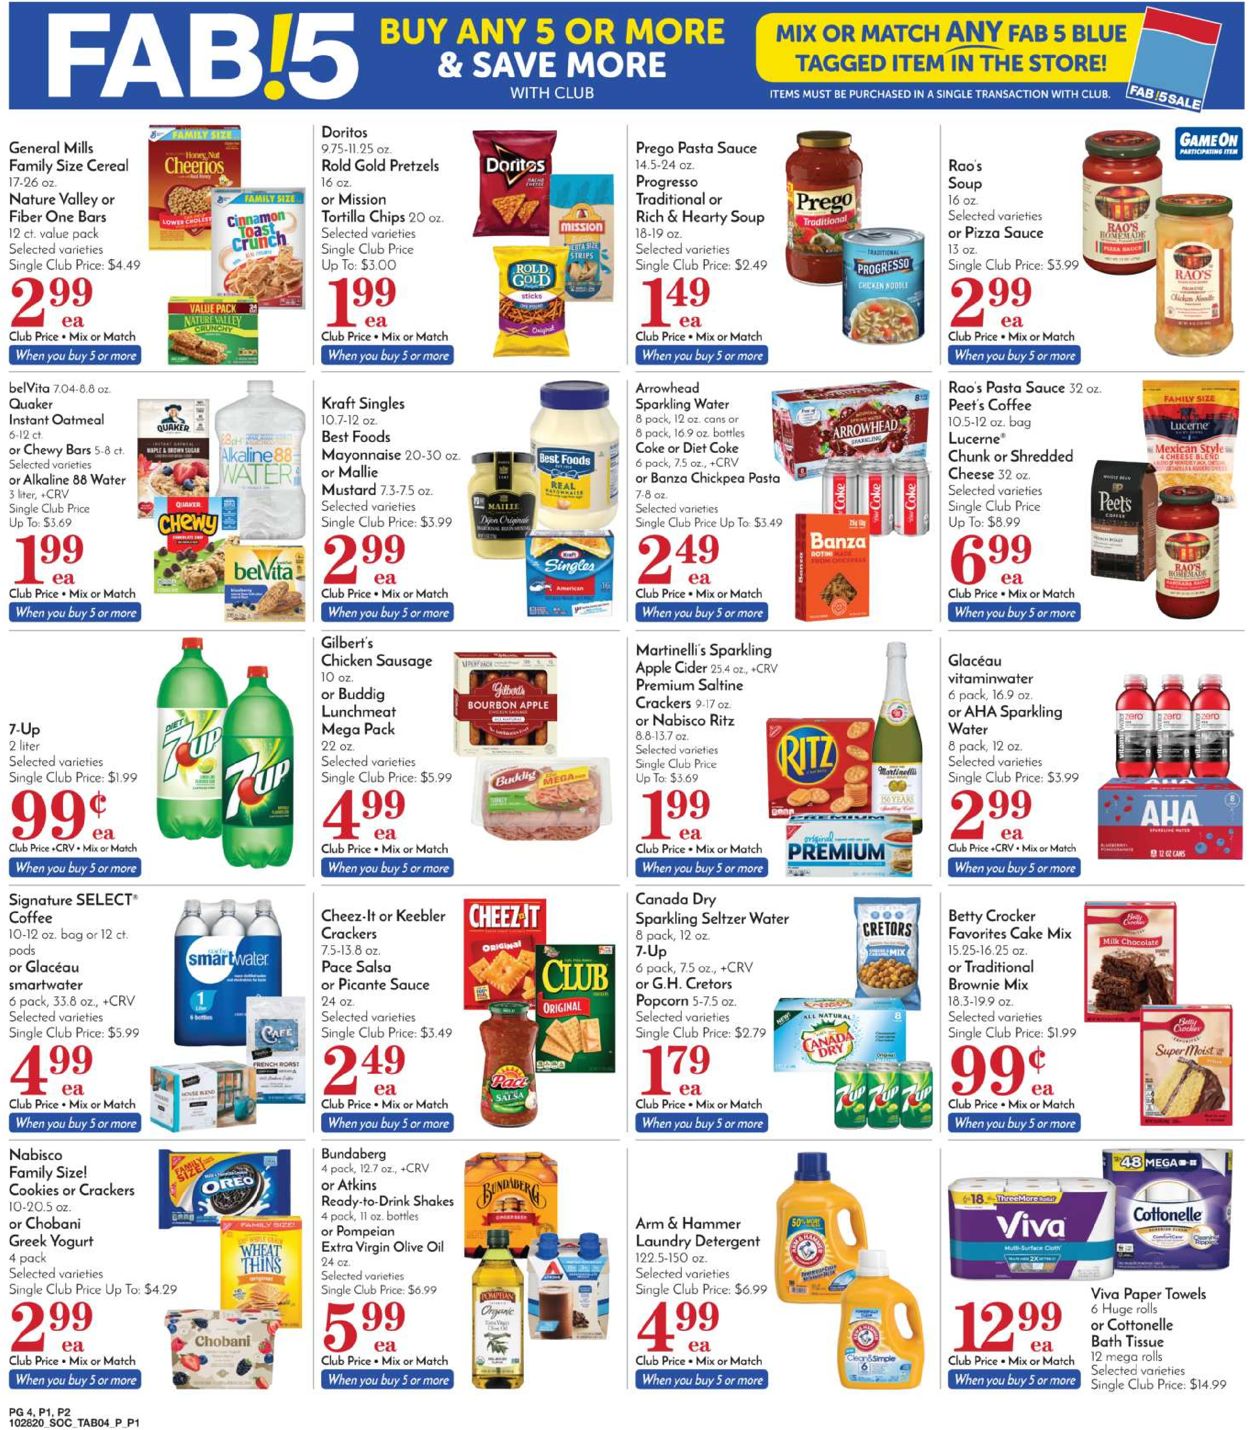 Pavilions Current weekly ad 10/28 - 11/03/2020 [4] - frequent-ads.com